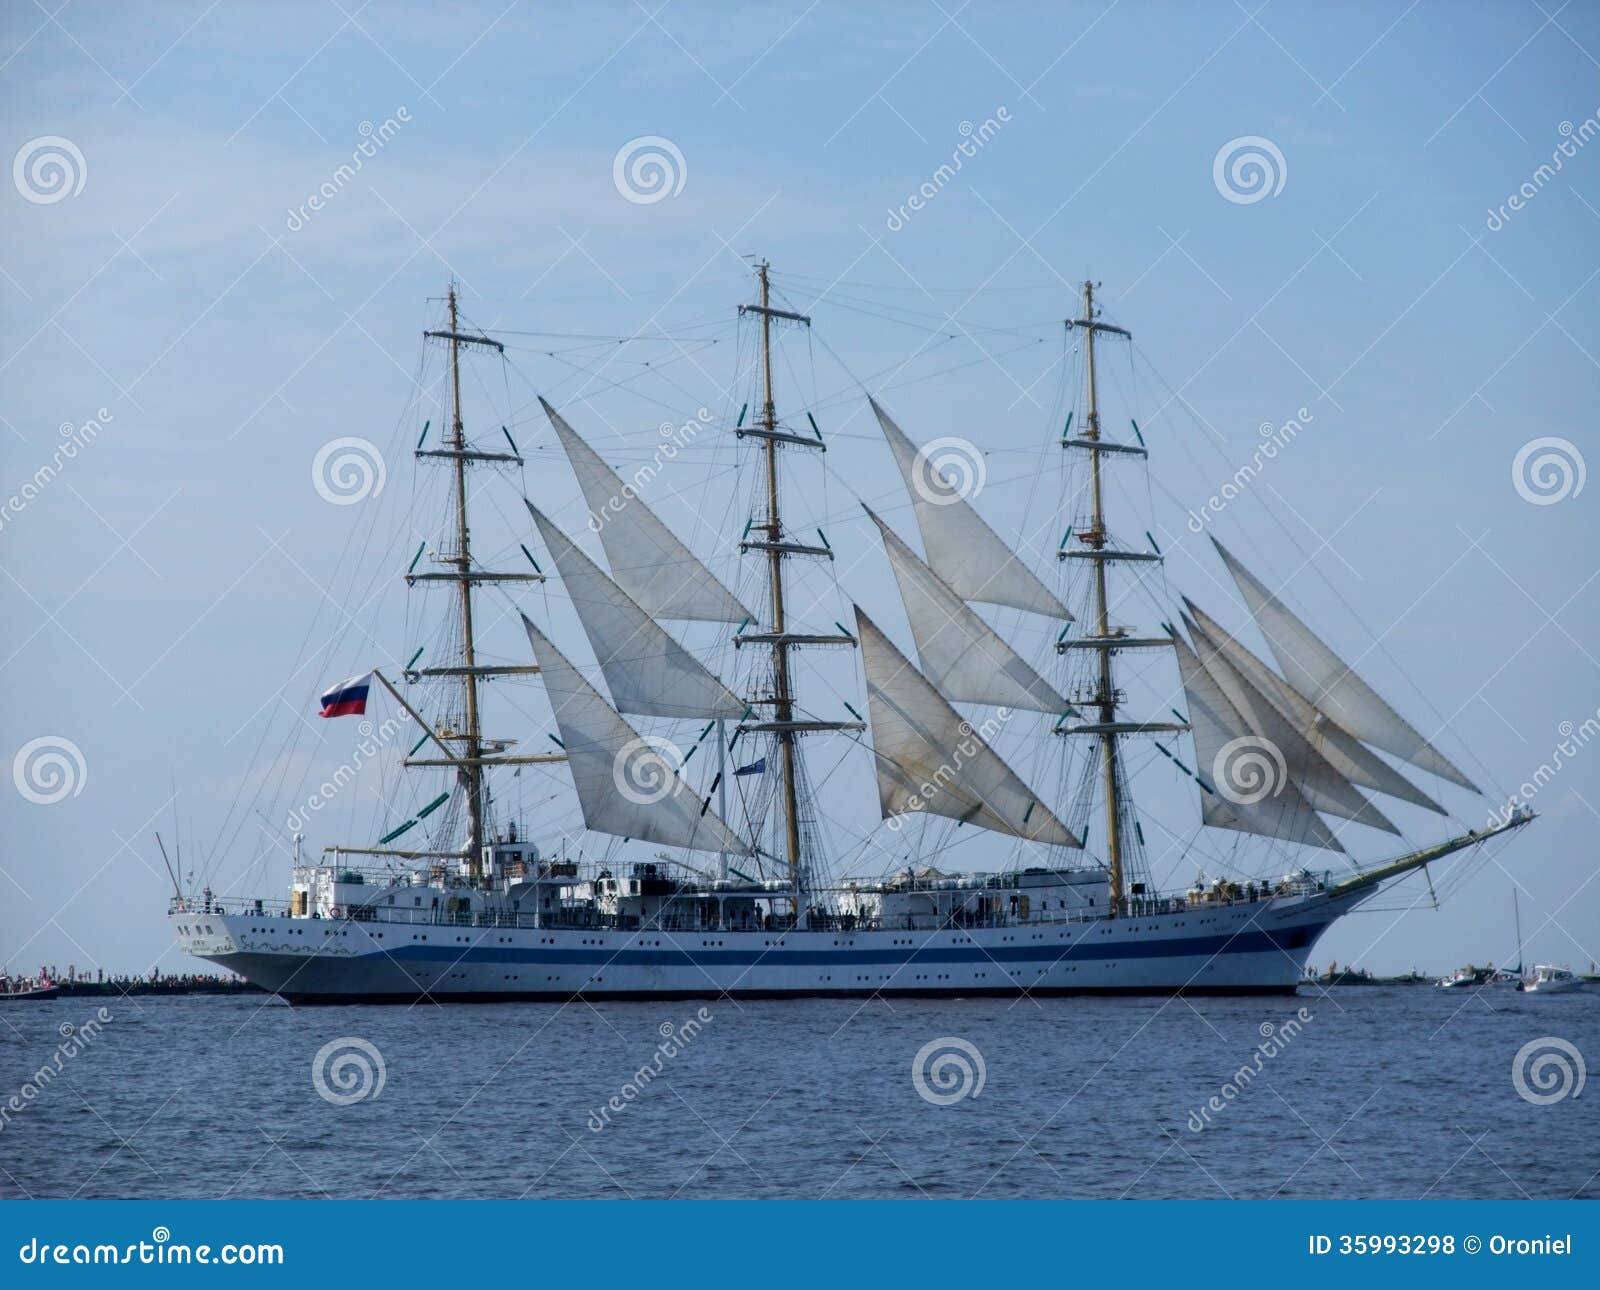 sailing russian ship stock photo. image of people, pier